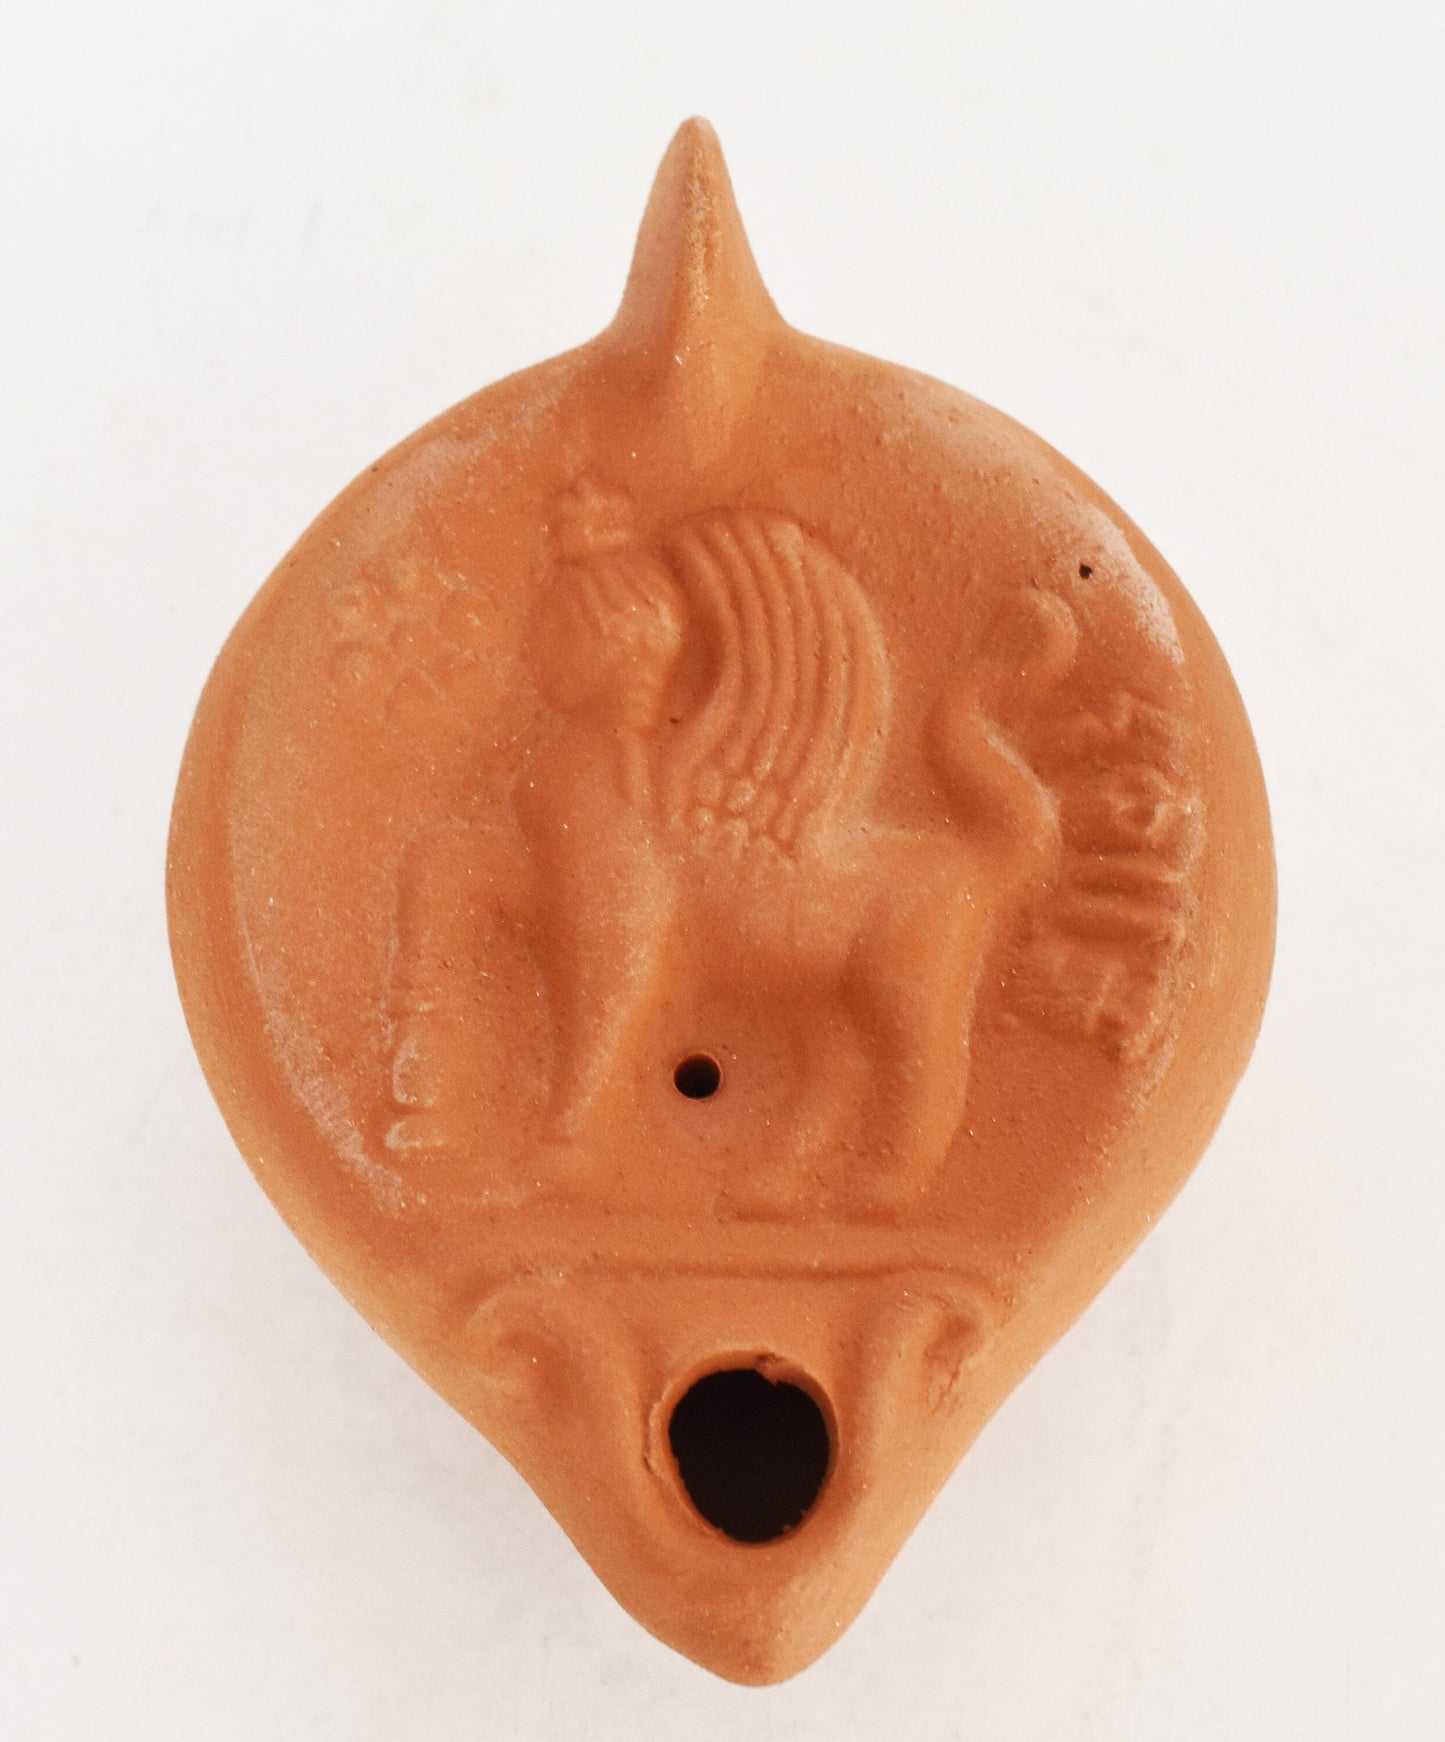 Oil Lamp - Athens, Attica - 600 BC - Sphinx - Guardian of Sacred Places - Symbol of Mystery - Museum Reproduction - Ceramic Artifact